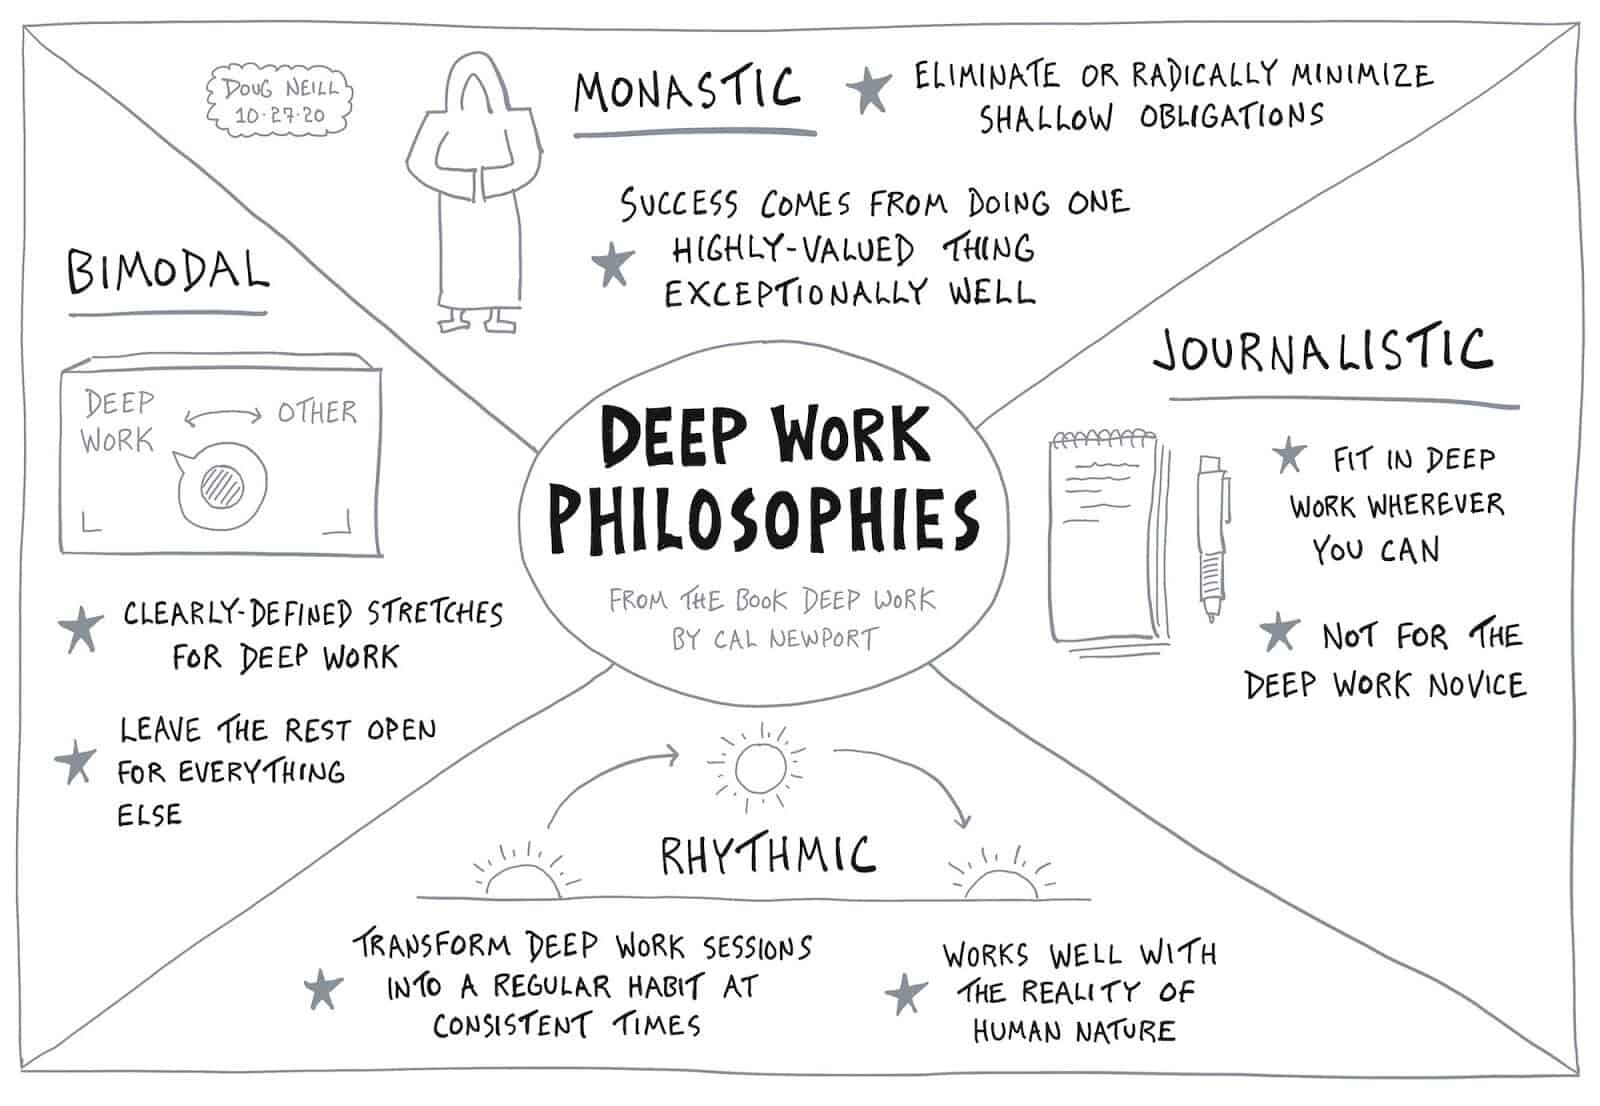 Find Focus in a Distracted World: A Review of "Deep Work" By Cal Newport